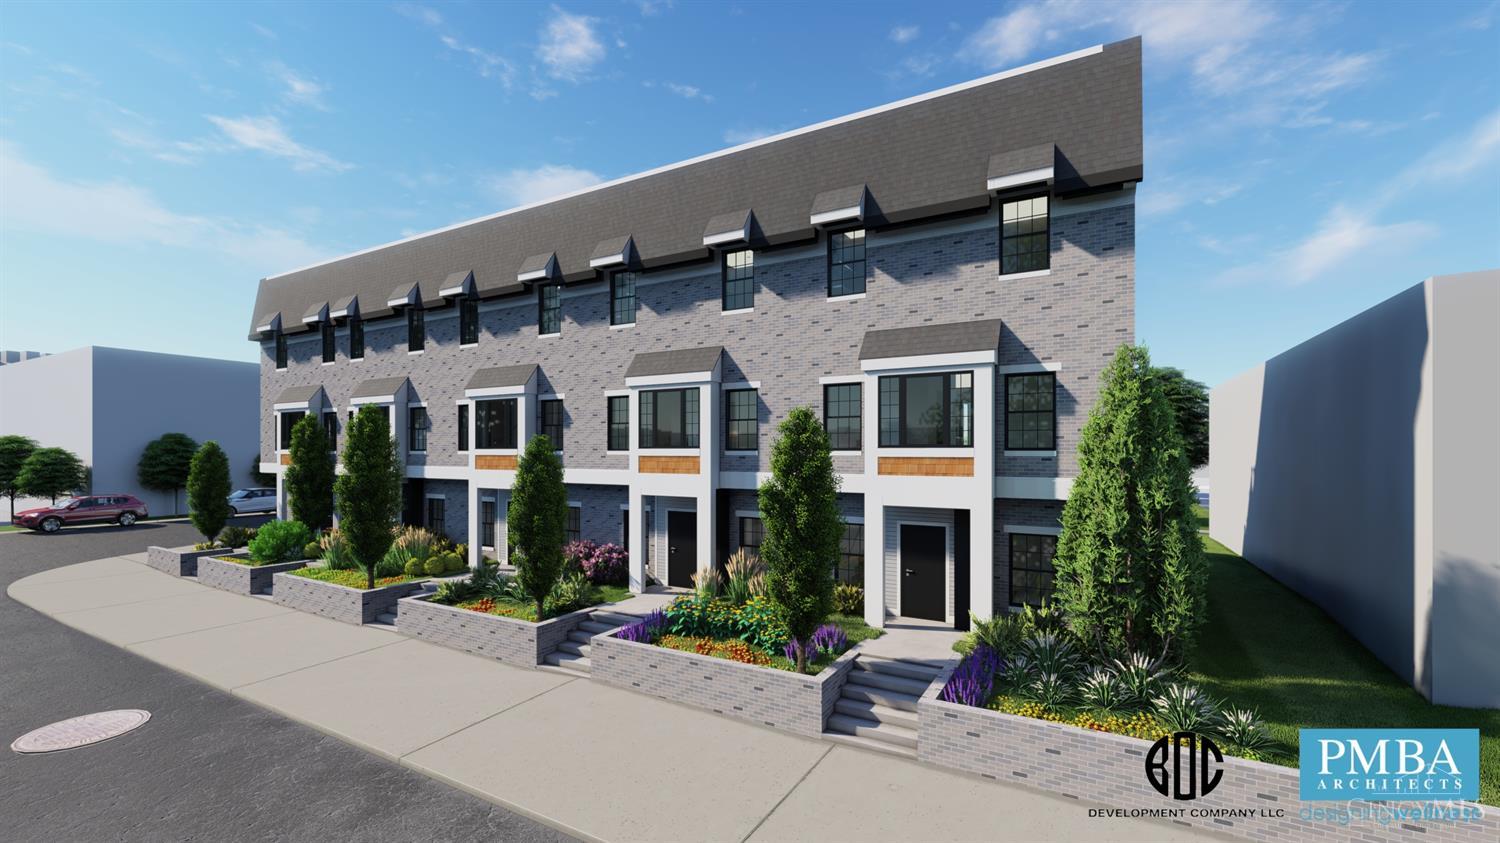 West End Revitalization - West End Luxury Townhomes - 3bed/3.5 bath w/2 car garage - Minutes away from Findlay Market, Washington Park, the up and coming TQL multiplex on Liberty Avenue and much more new development.